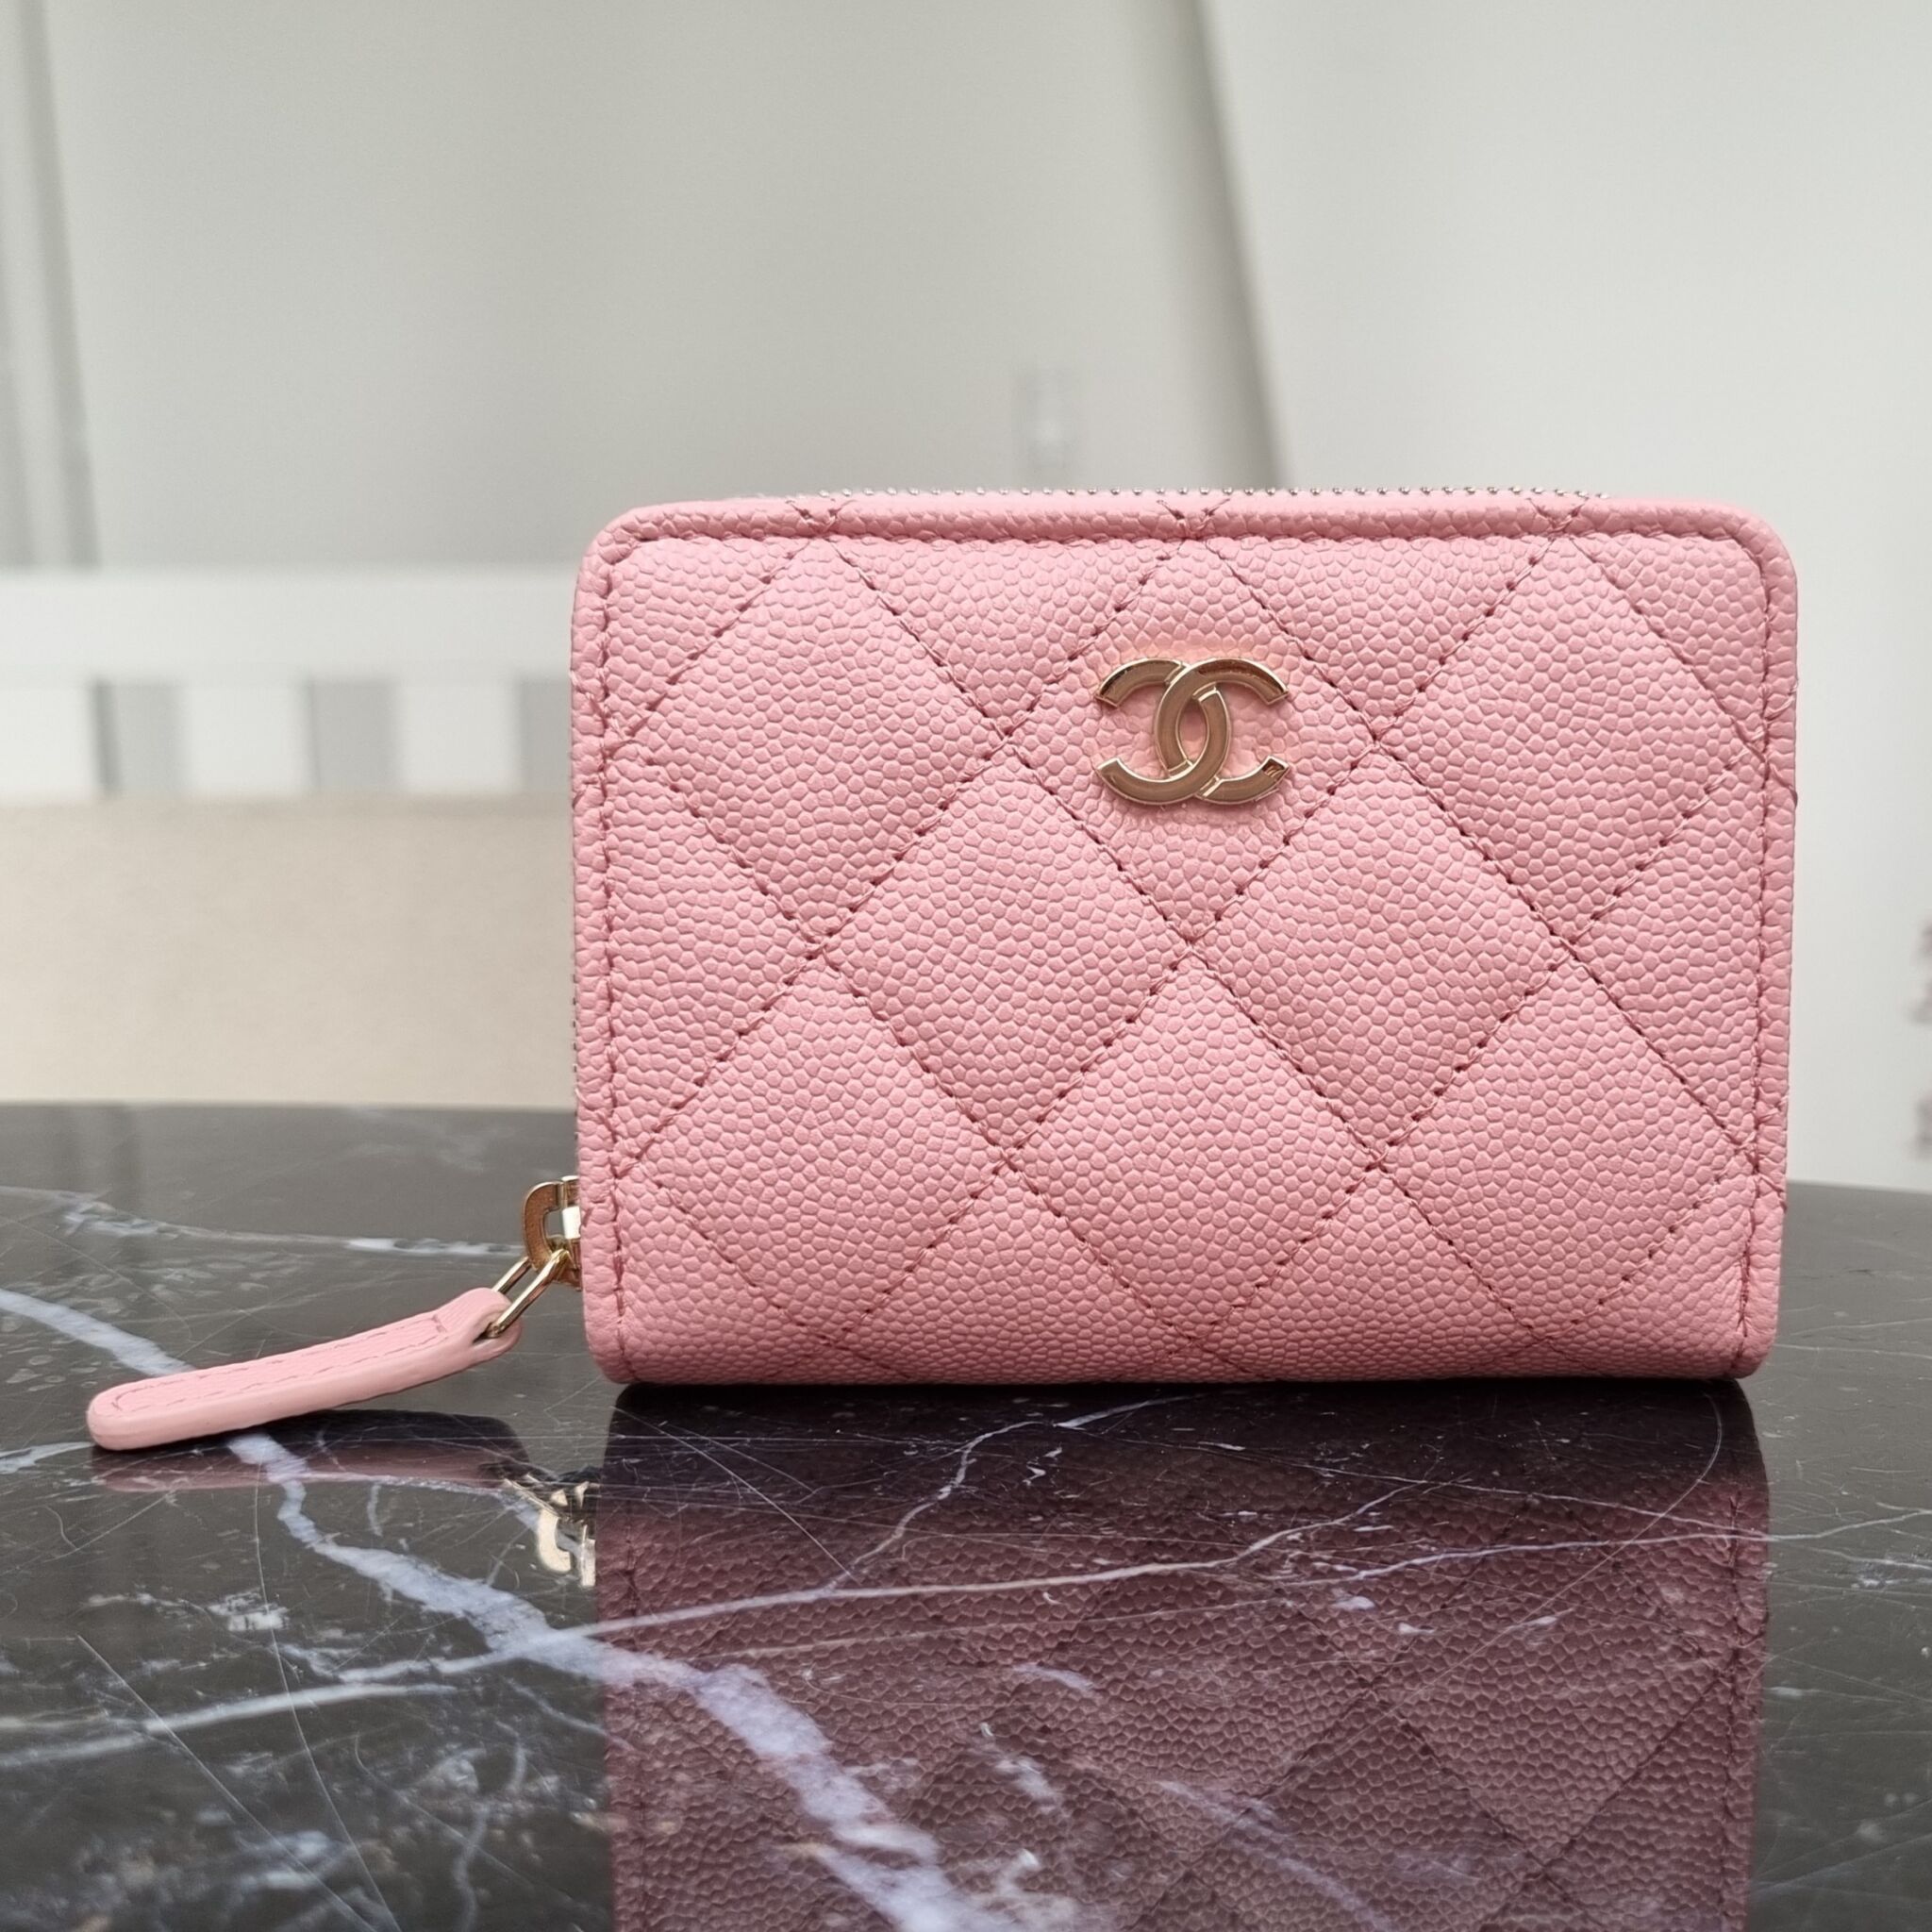 22P Small Compact Wallet, Caviar, Pink GHW - Laulay Luxury